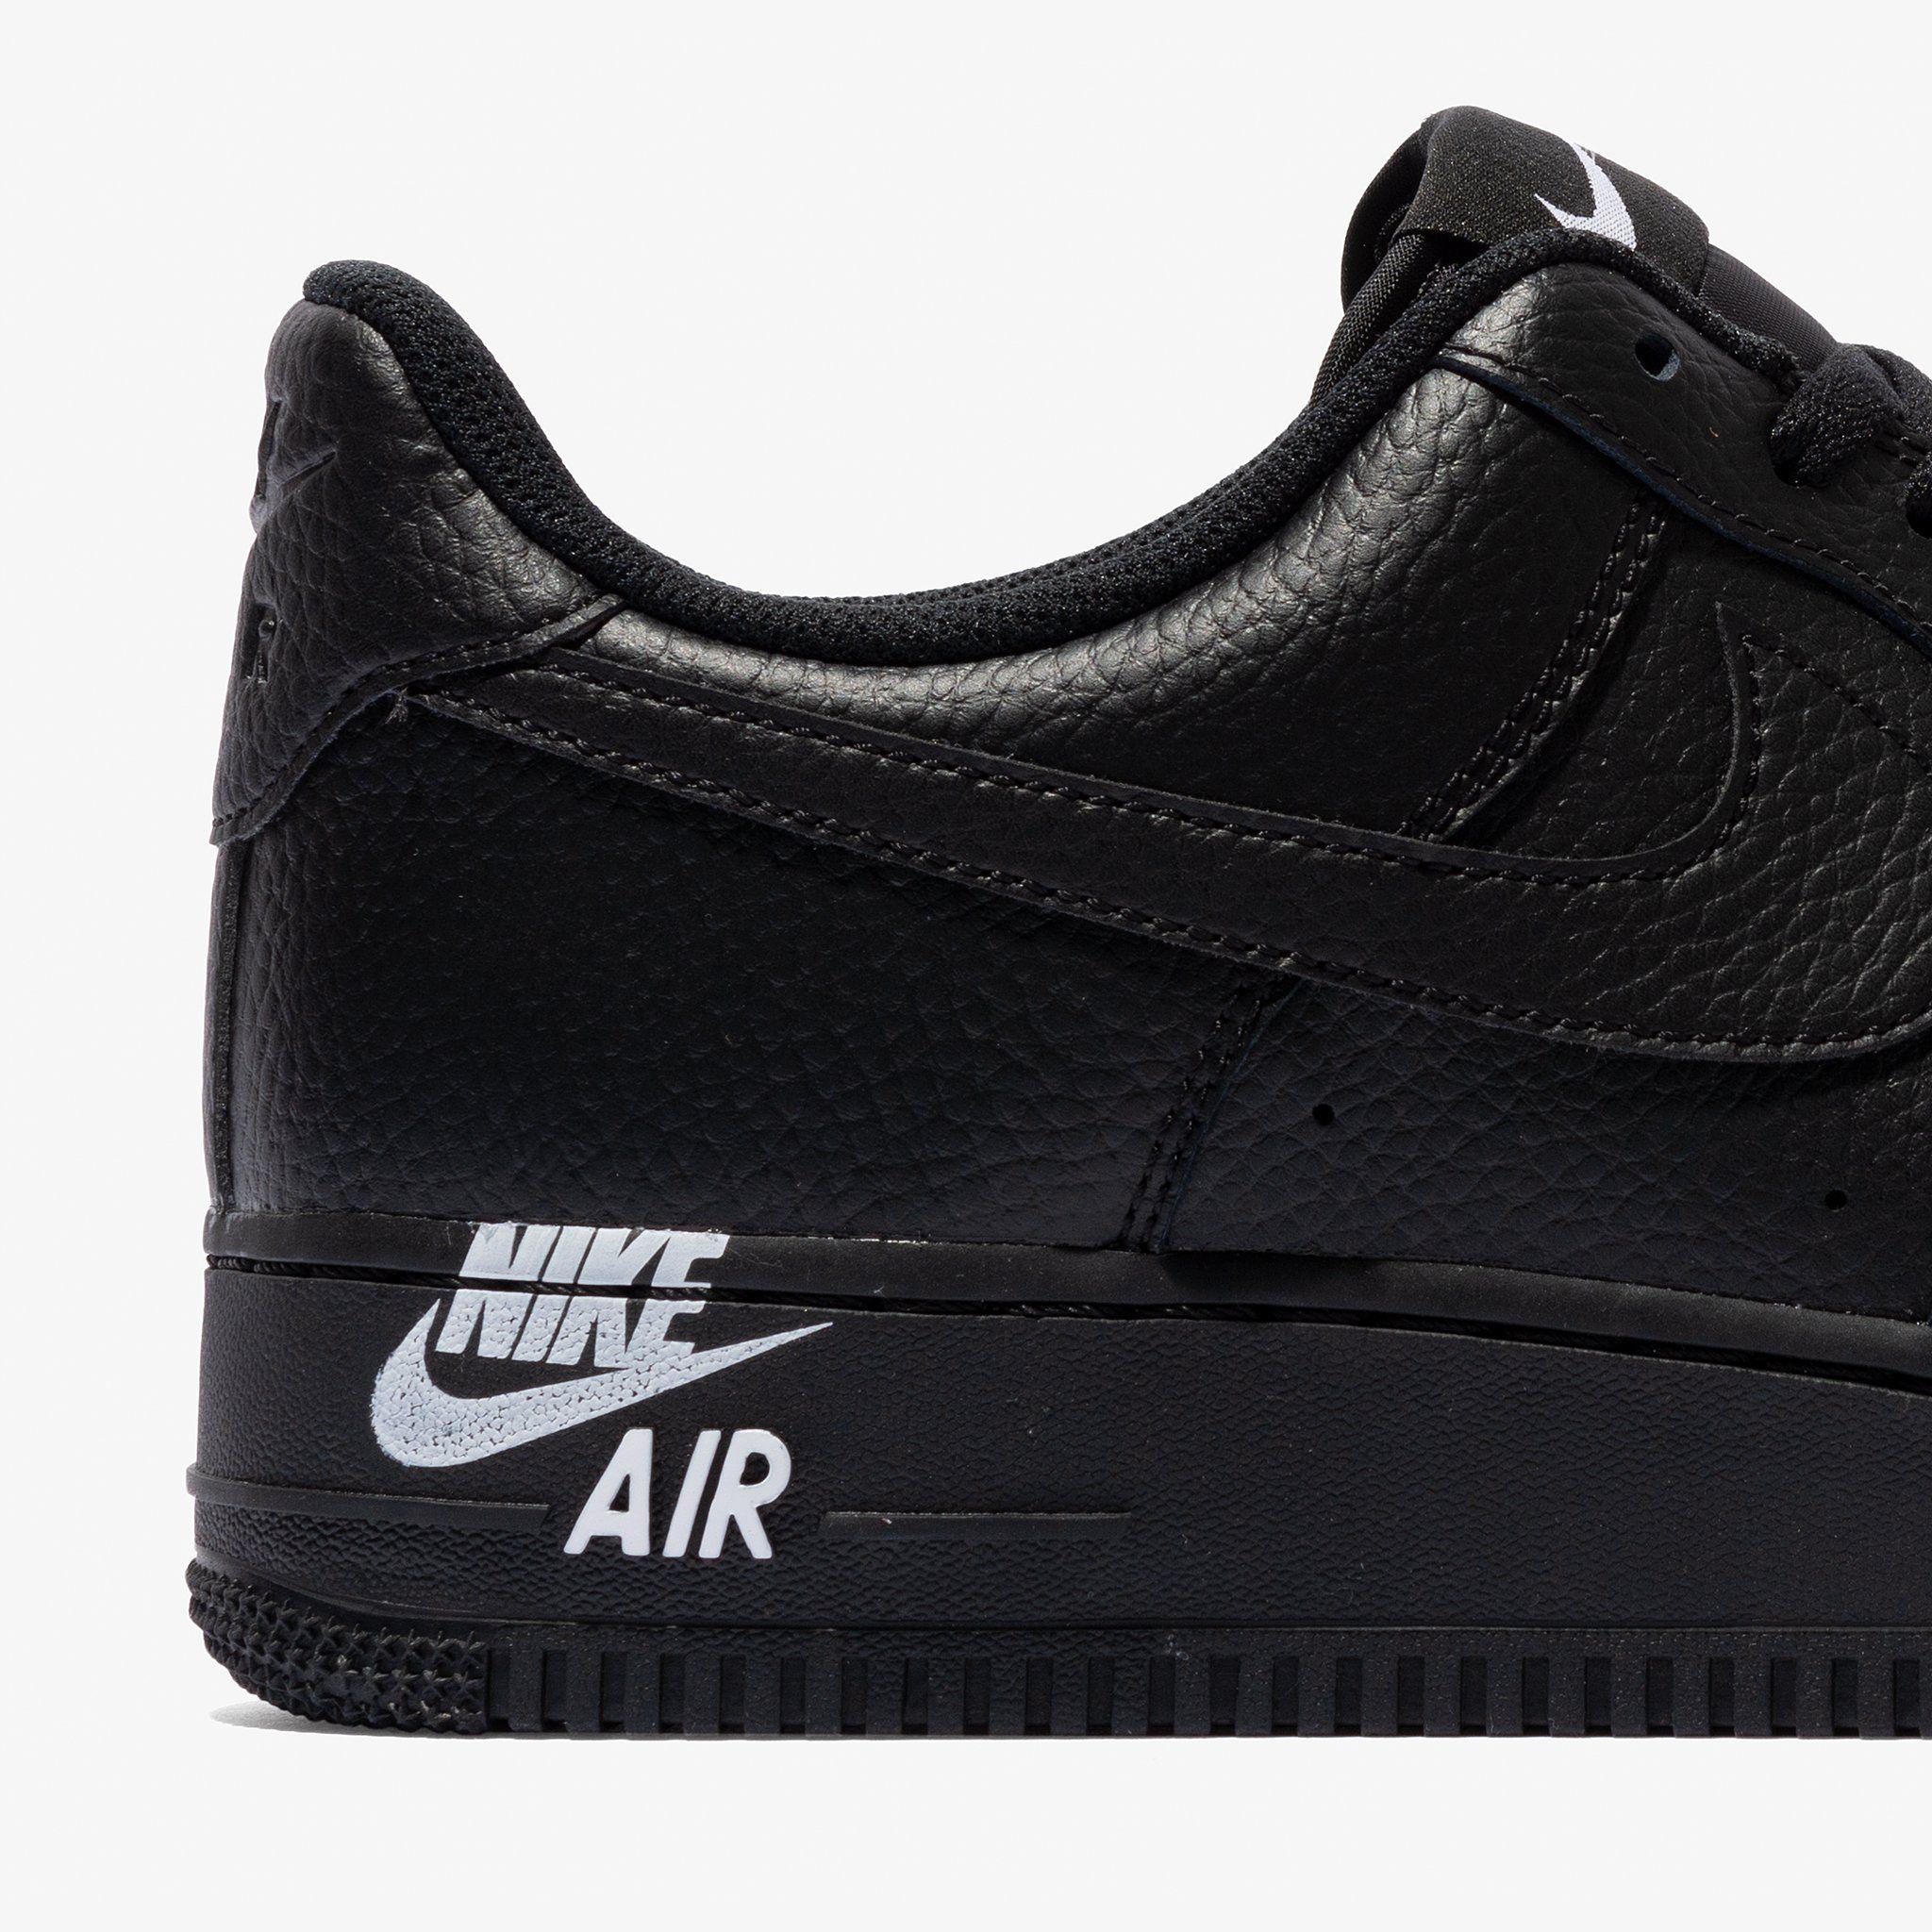 Air Force 1 Logo - Nike Air Force 1 Stamp Logo Follows With A Triple Black Rendition ...